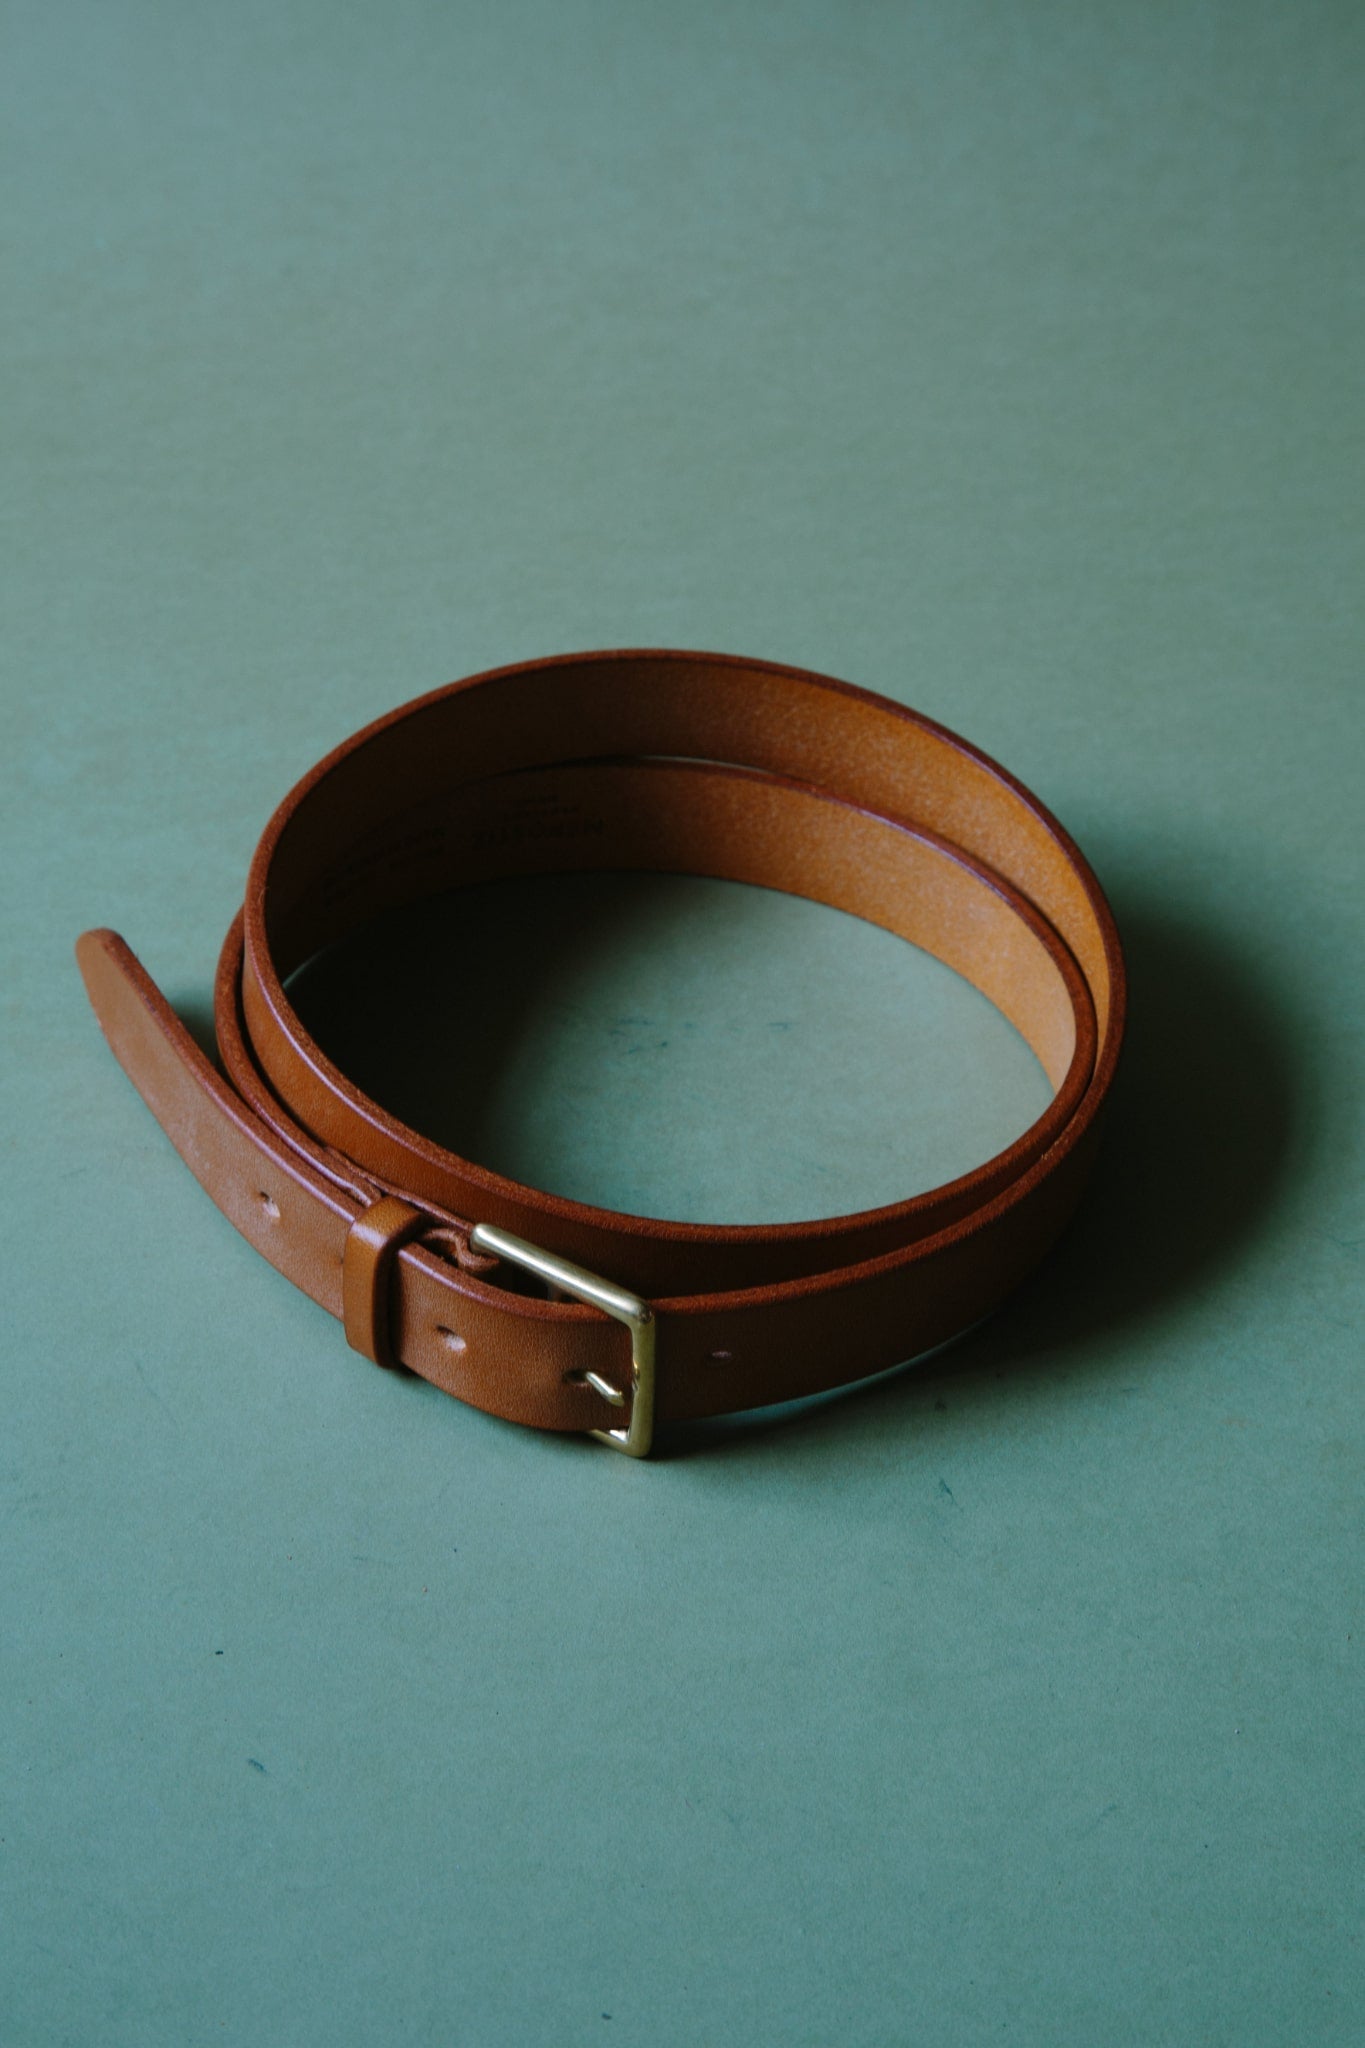 A tan bridle leather belt, wrapped into a circle so it fits within frame. The metal belt is buckle can be seen.